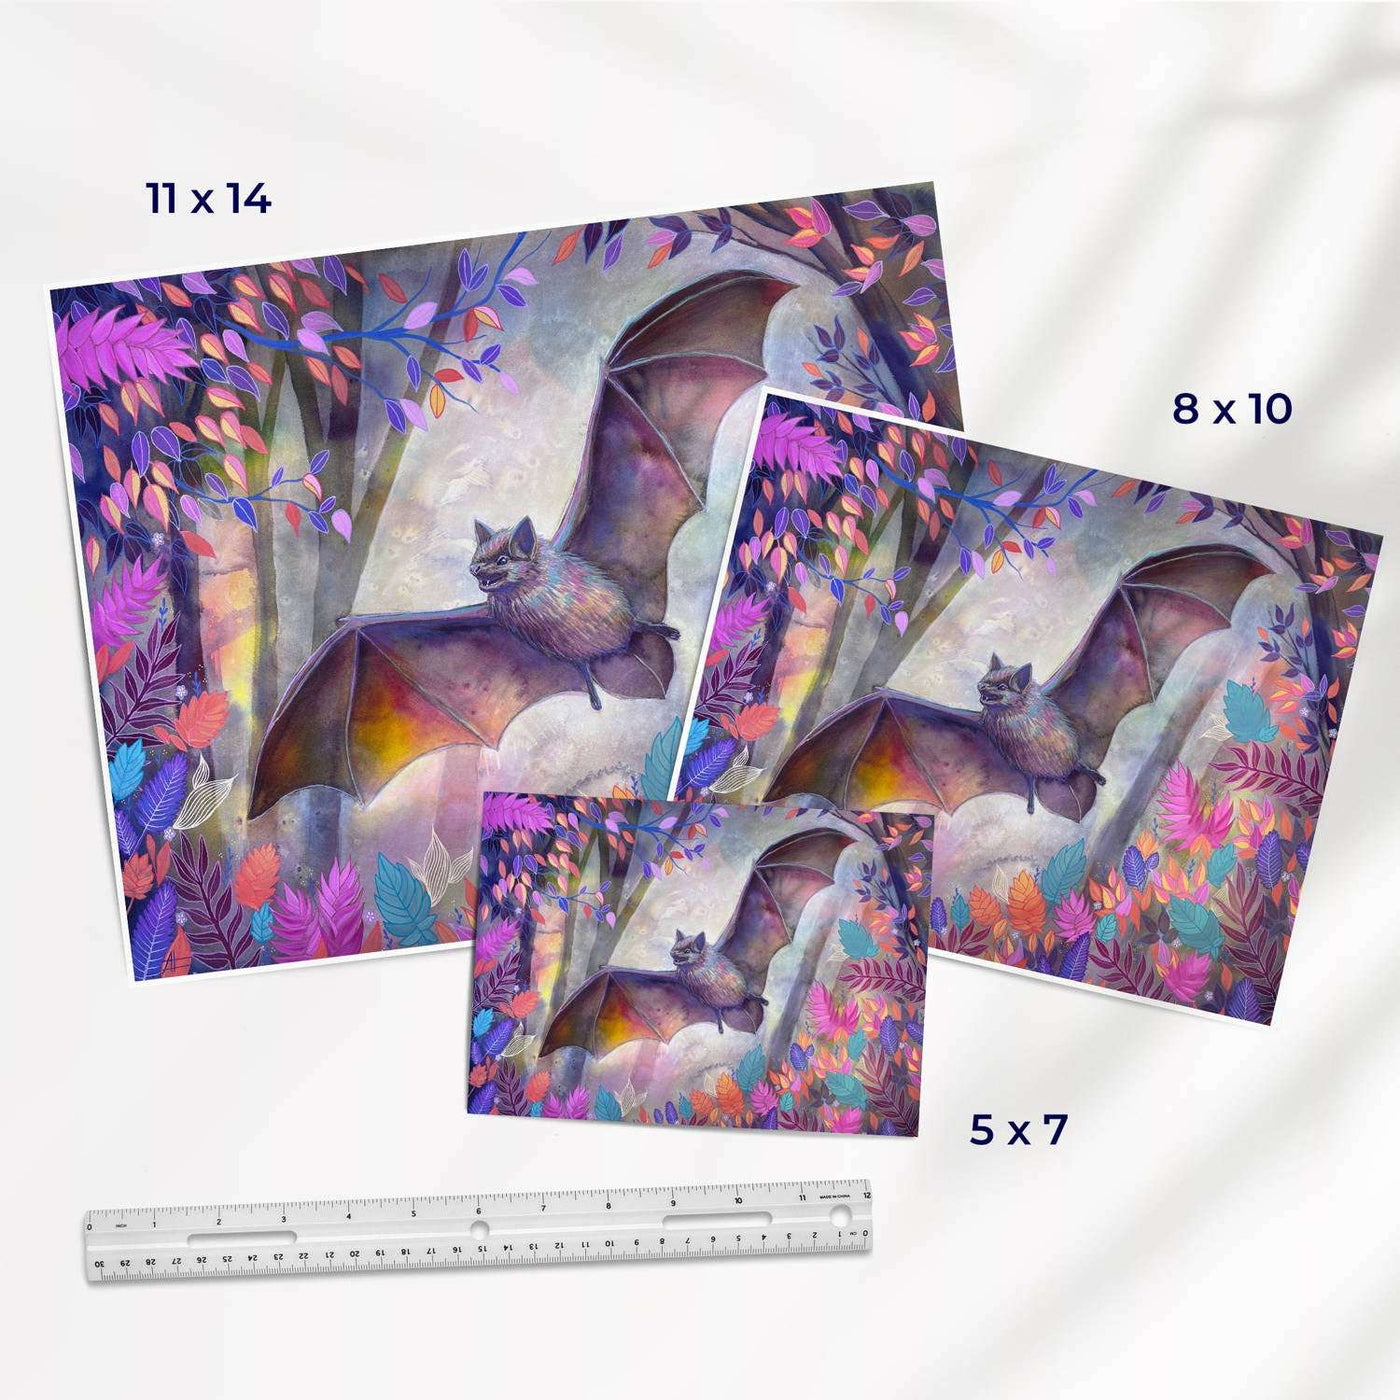 Art prints of various sizes showcasing a bat in a colorful forest, with a ruler for scale.